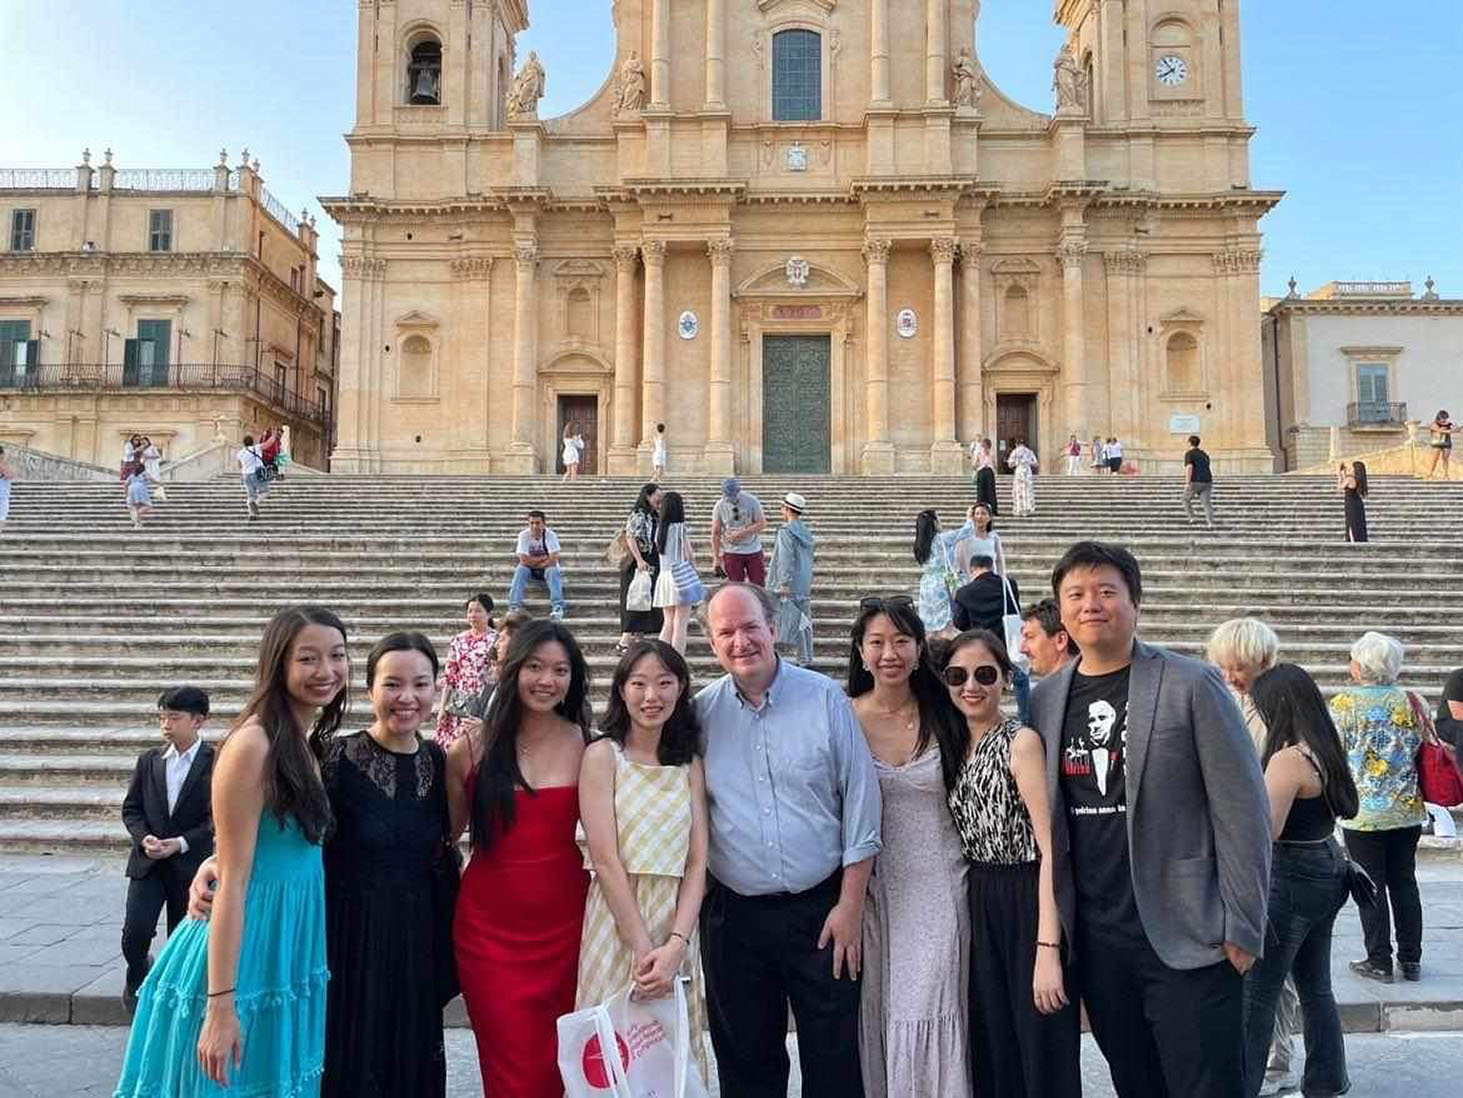 Group of 8 poses in front of grand steps to a historic Italian building